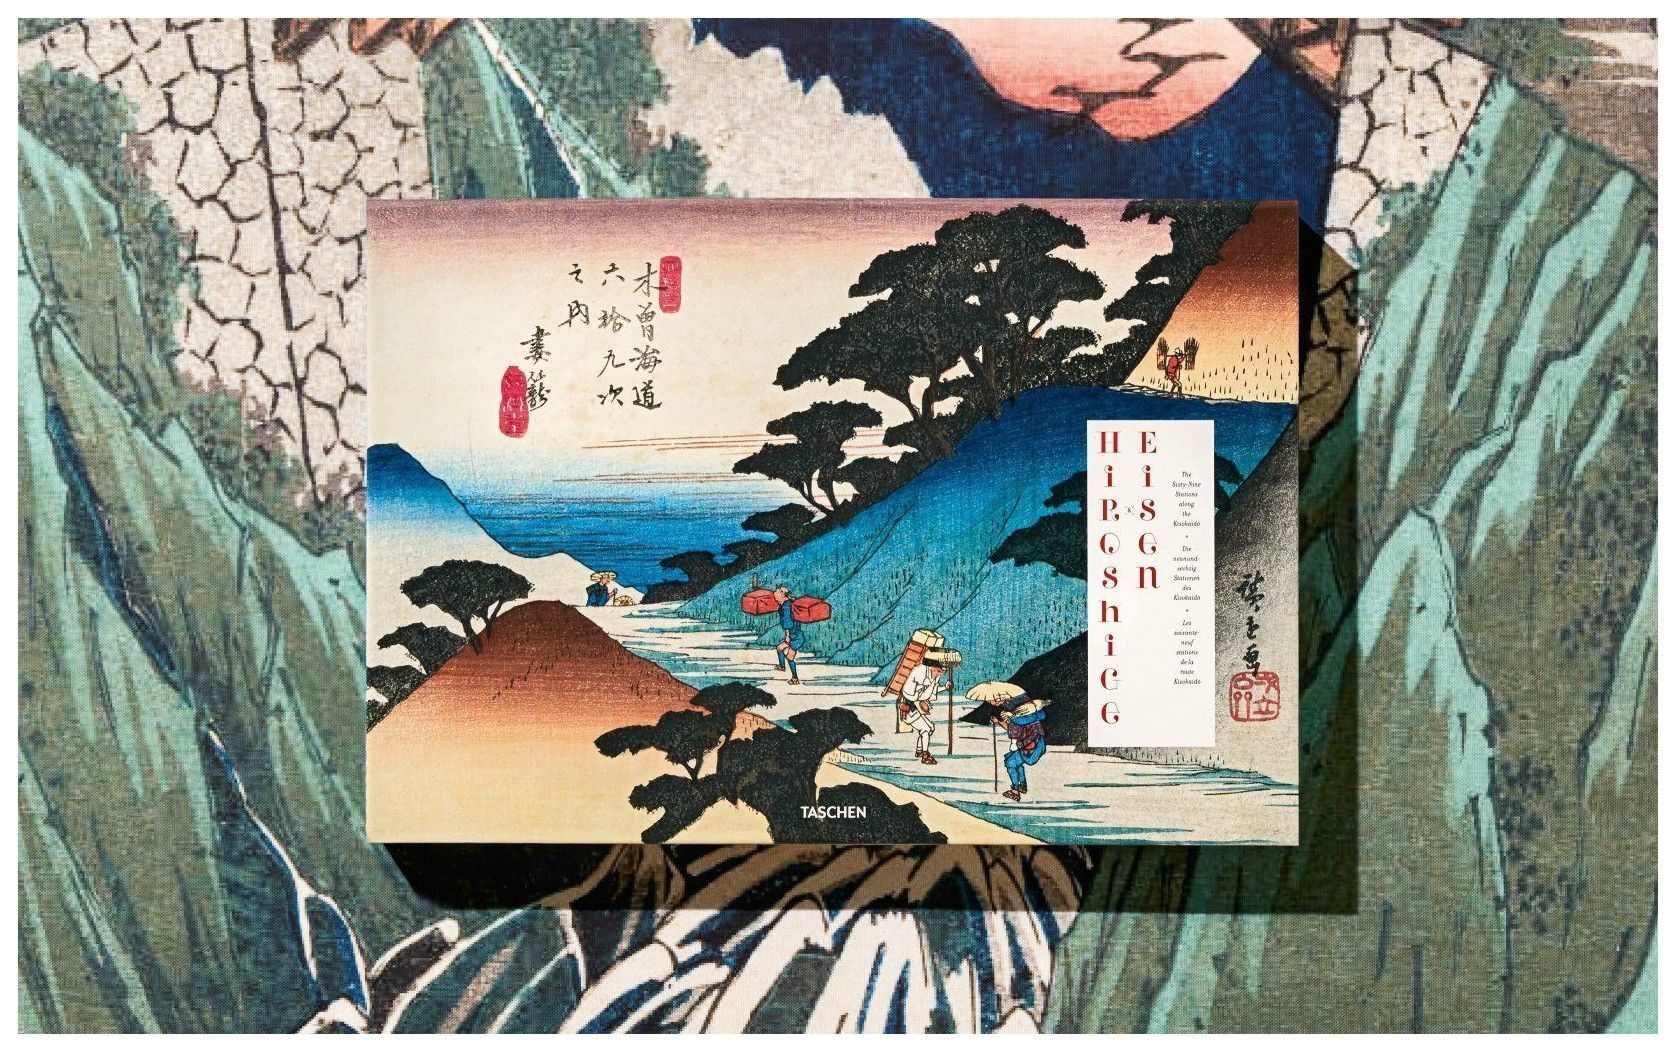 Marks A., Paget R. - Hiroshige & Eisen: The Sixty-Nine Stations Along the Kisokaido